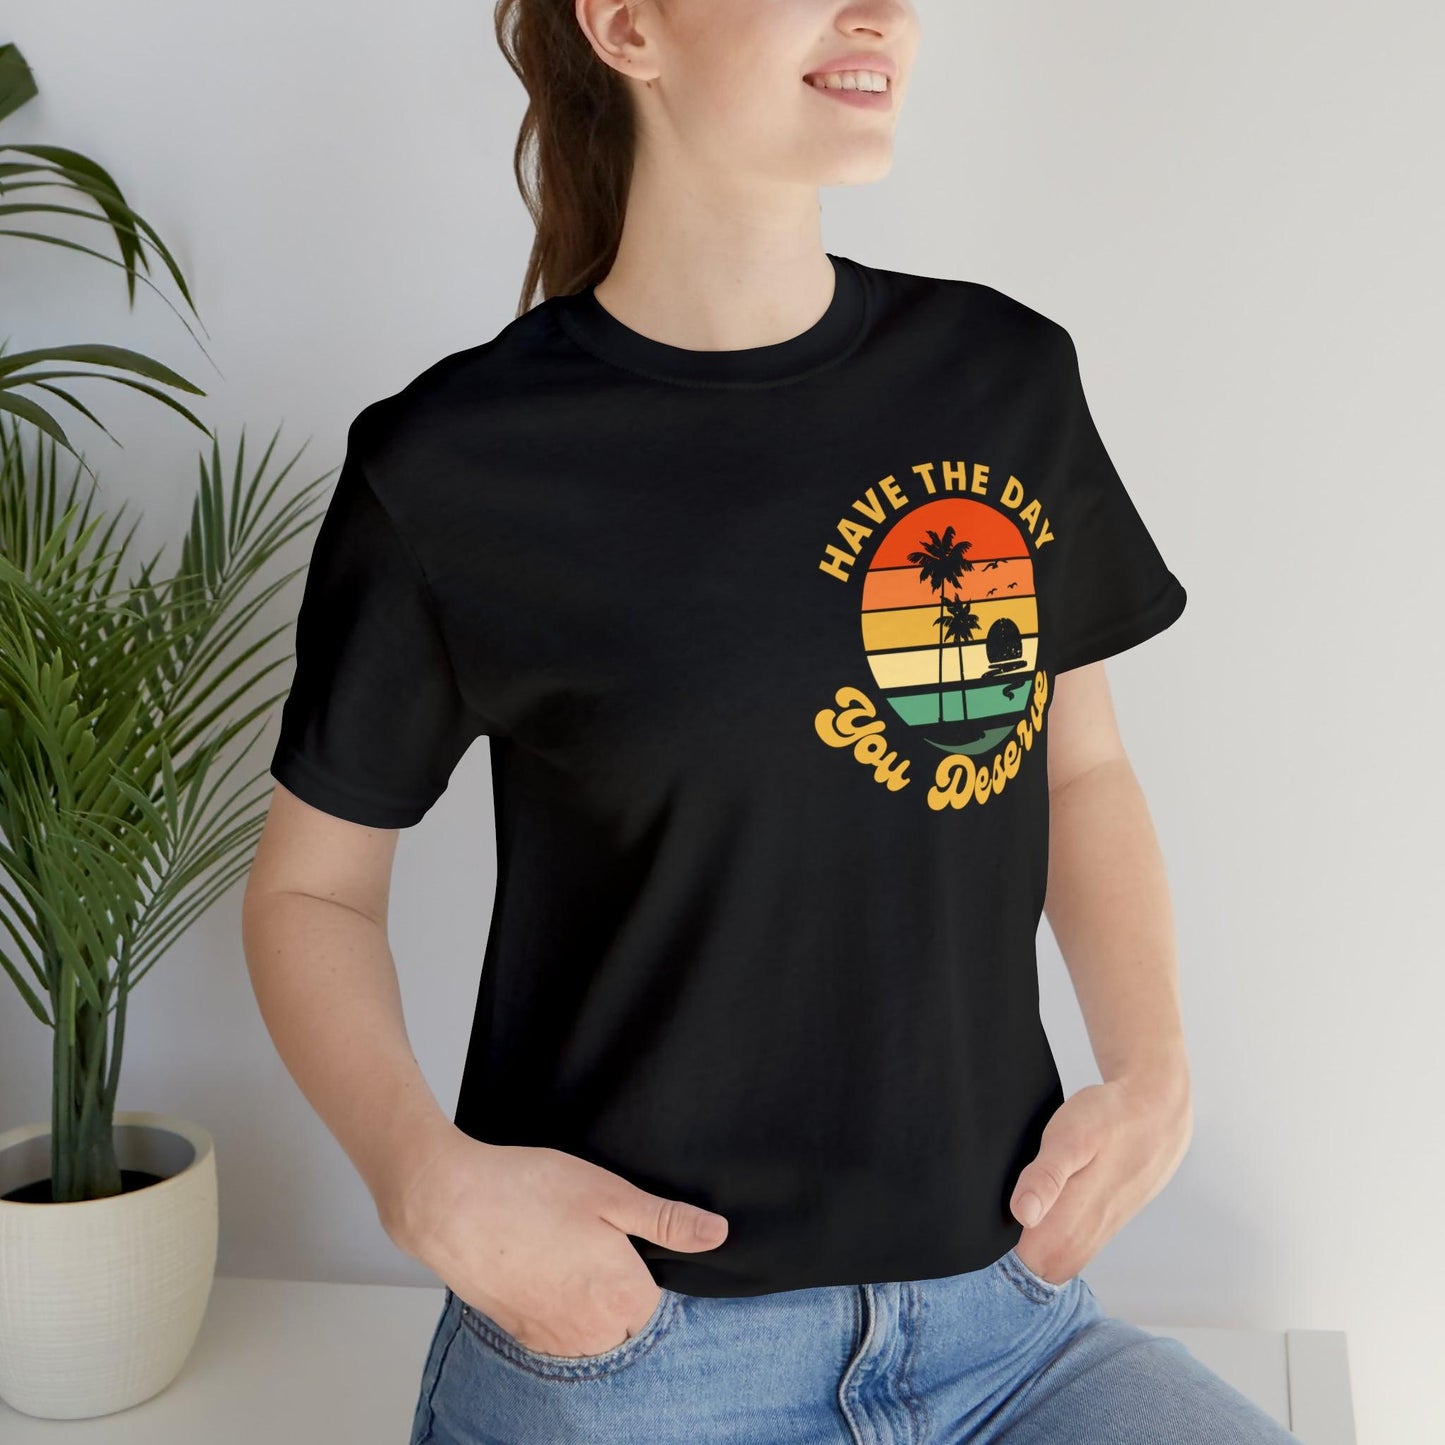 Have the Day You Deserve Shirt, Inspirational Graphic Tee, Motivational Tee, Positive Vibes Shirt, Trendy shirt and Vintage shirt